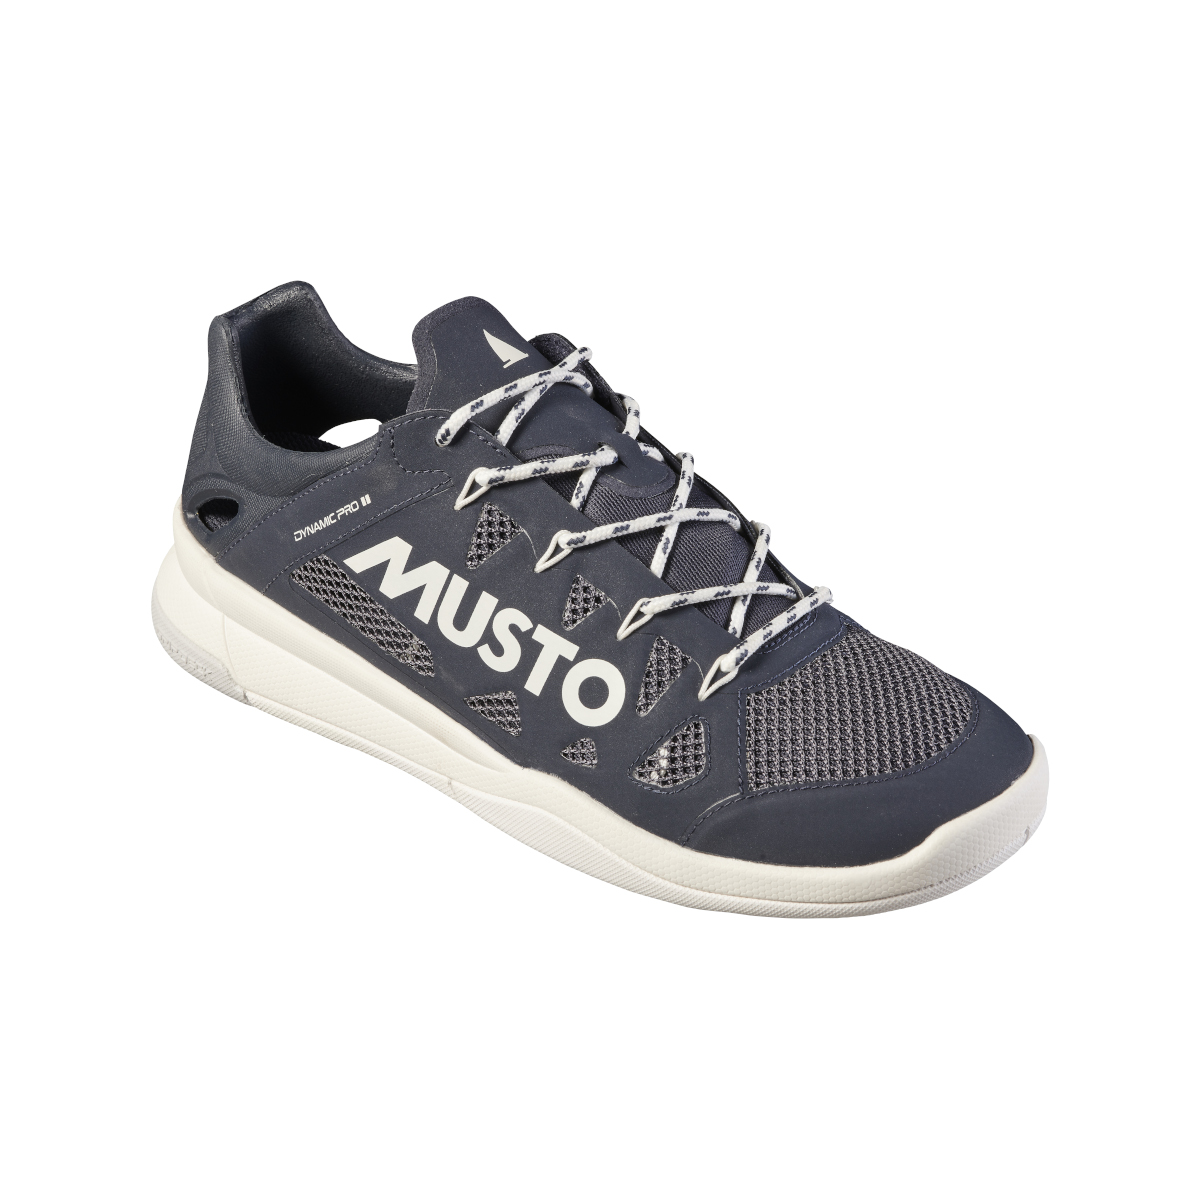 Musto Dynamic Pro II chaussures de voile homme bleu marine, taille 42